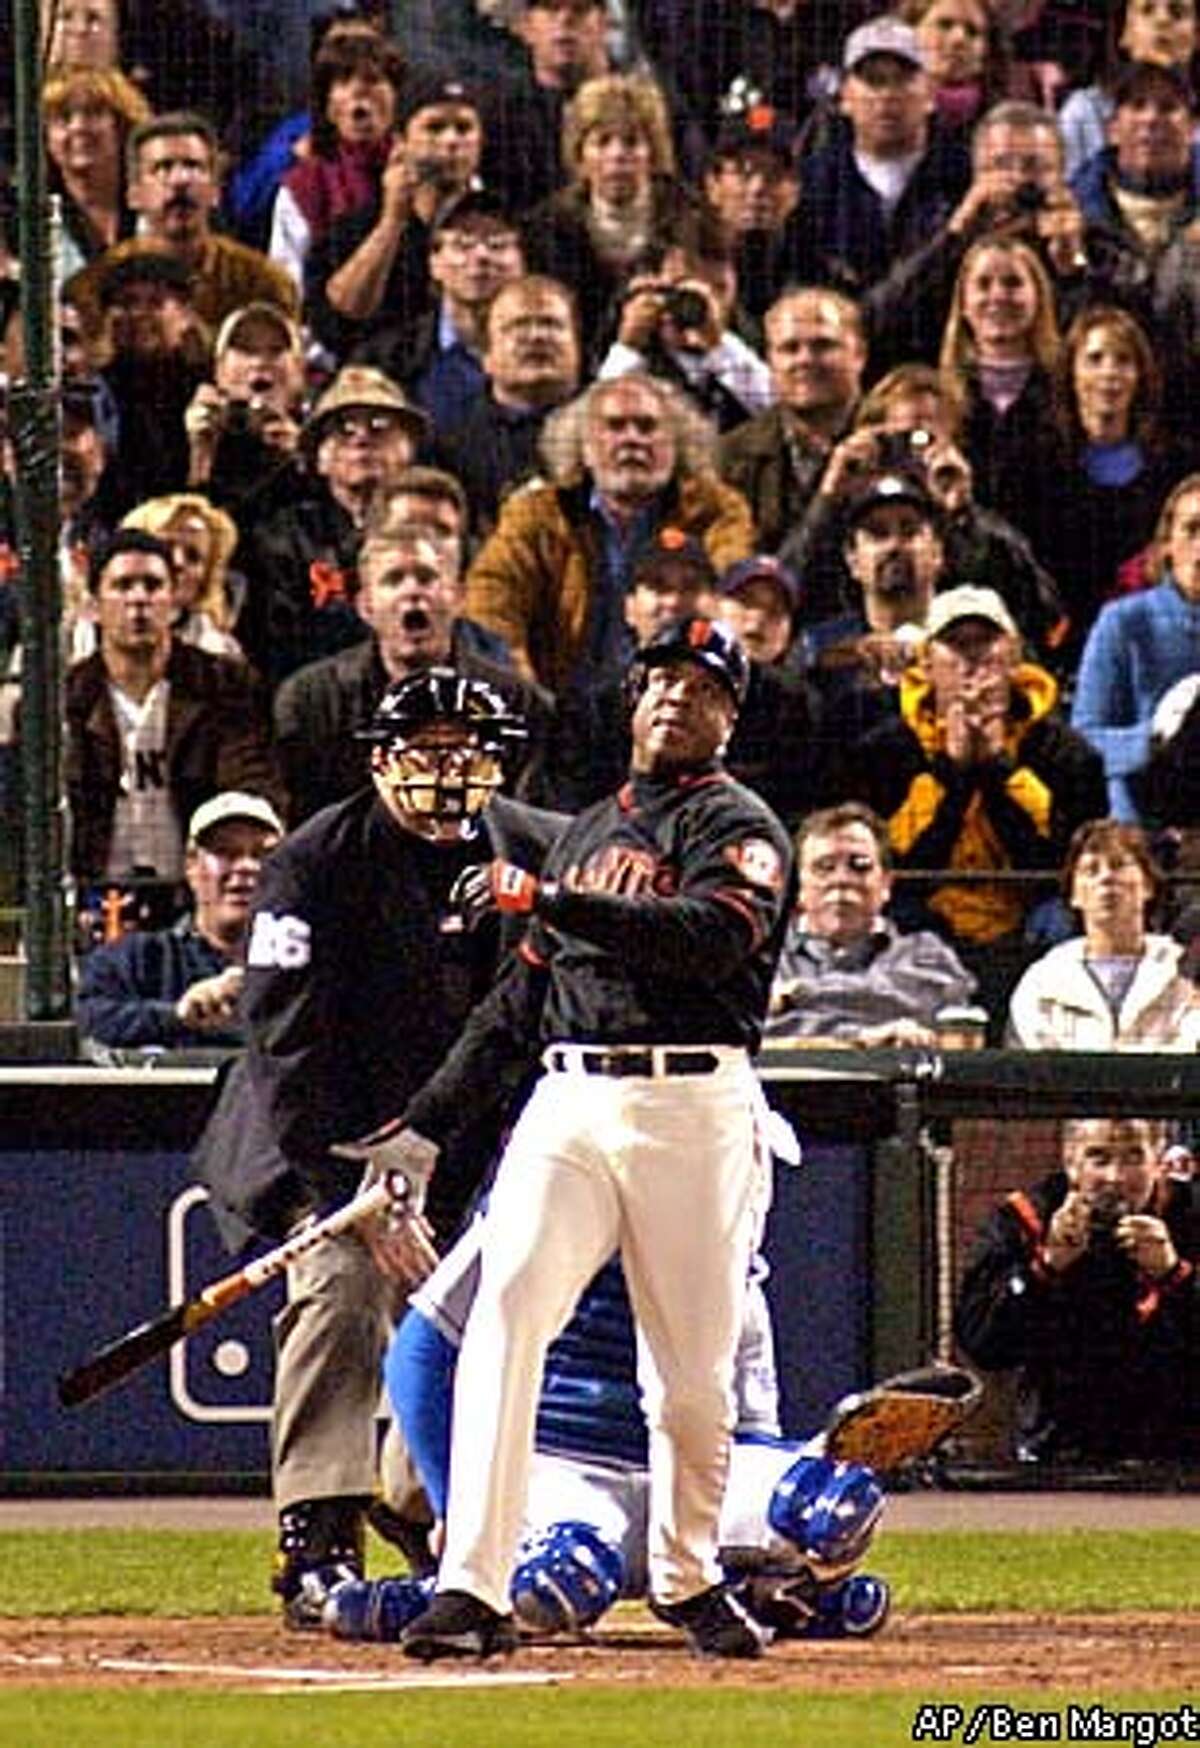 The day Barry Bonds hit his 71st home run to break Mark McGwire's